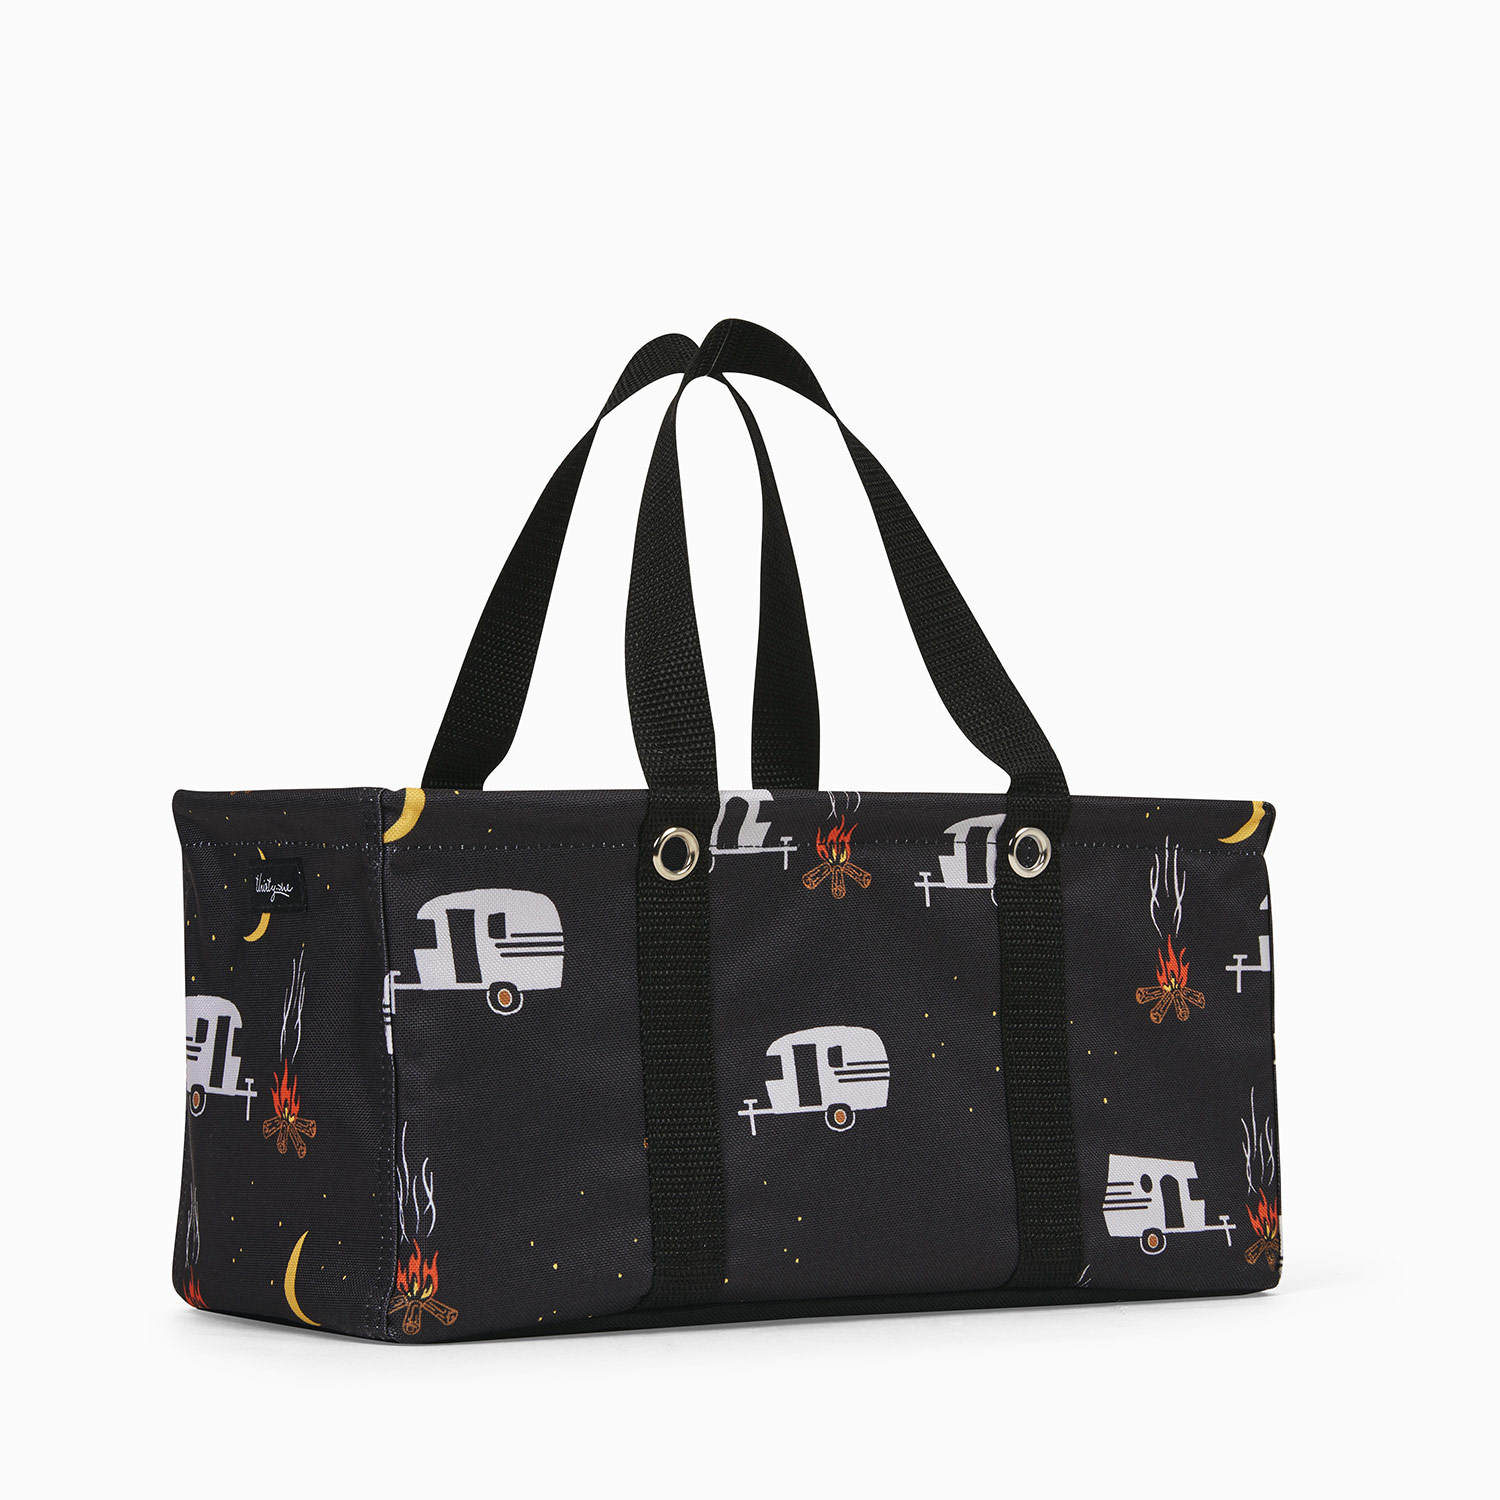 Camp Nights - Zip-Top Organizing Utility Tote - Thirty-One Gifts -  Affordable Purses, Totes & Bags